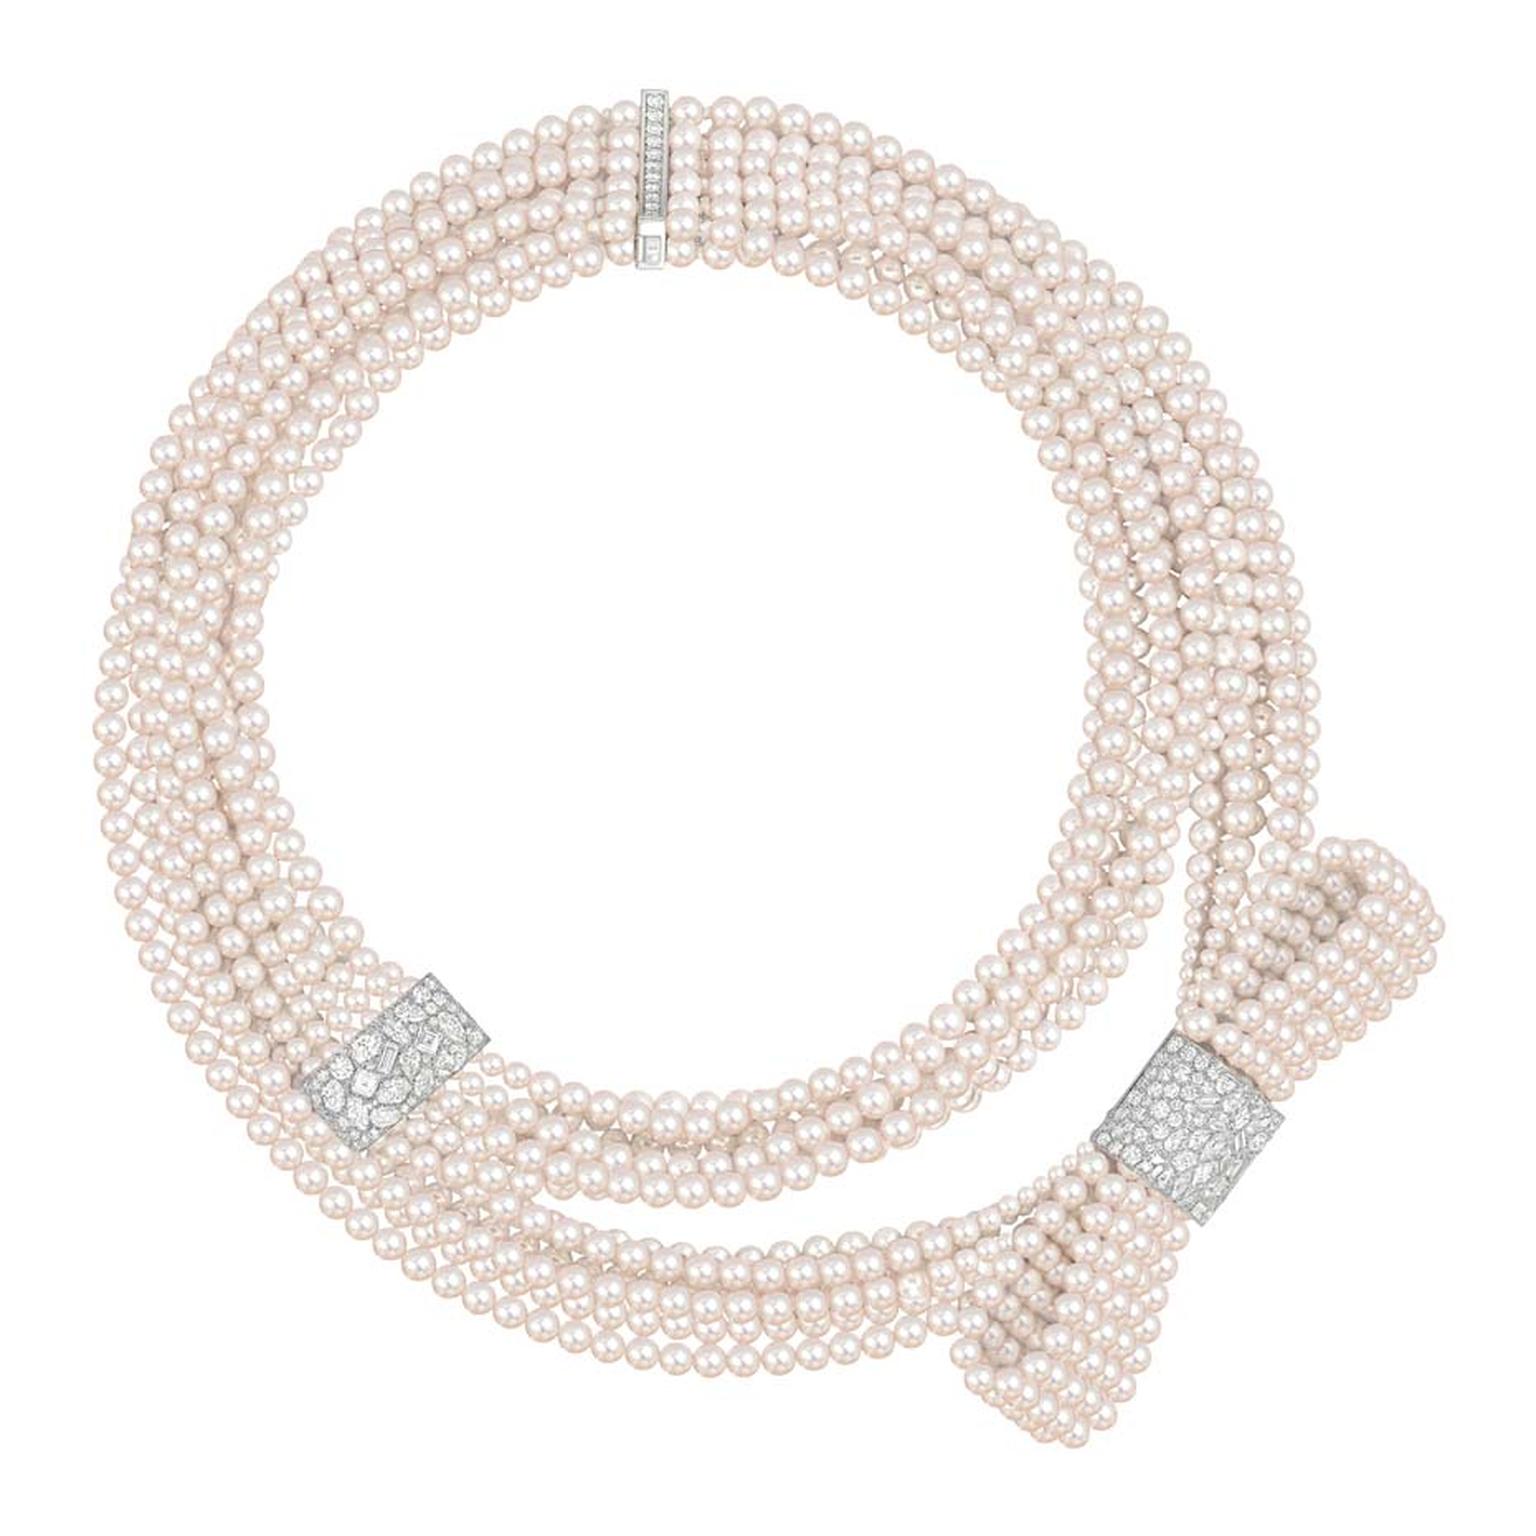 Chanel White Tie necklace, from the new Les Perles de Chanel collection